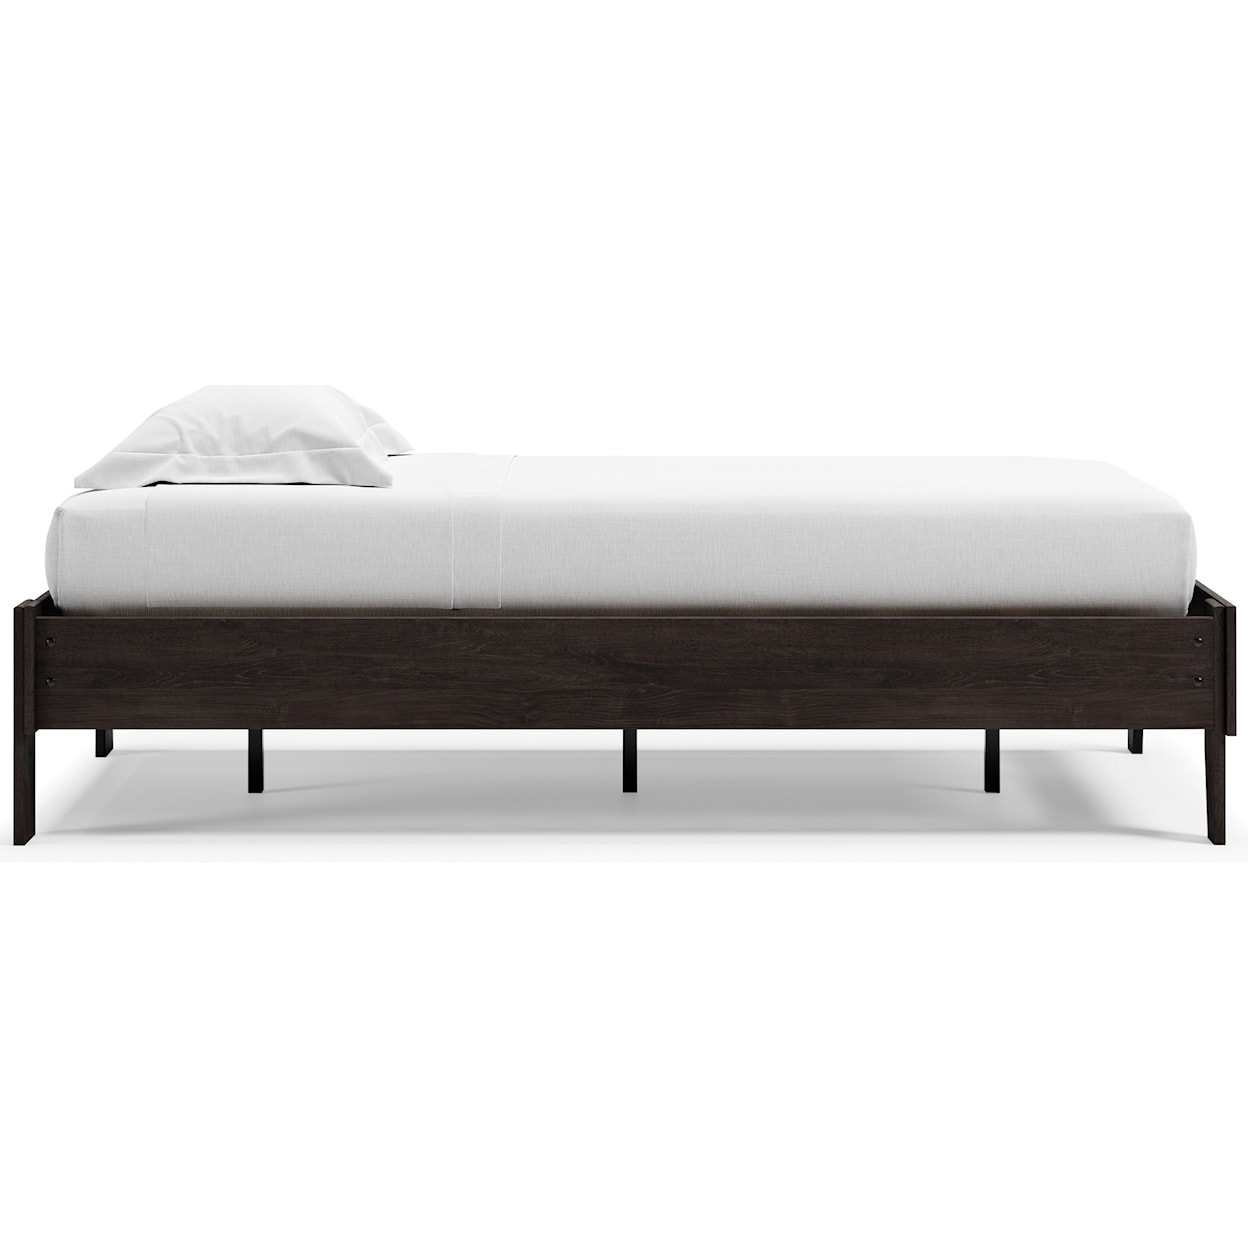 Signature Design by Ashley Piperton Twin Platform Bed